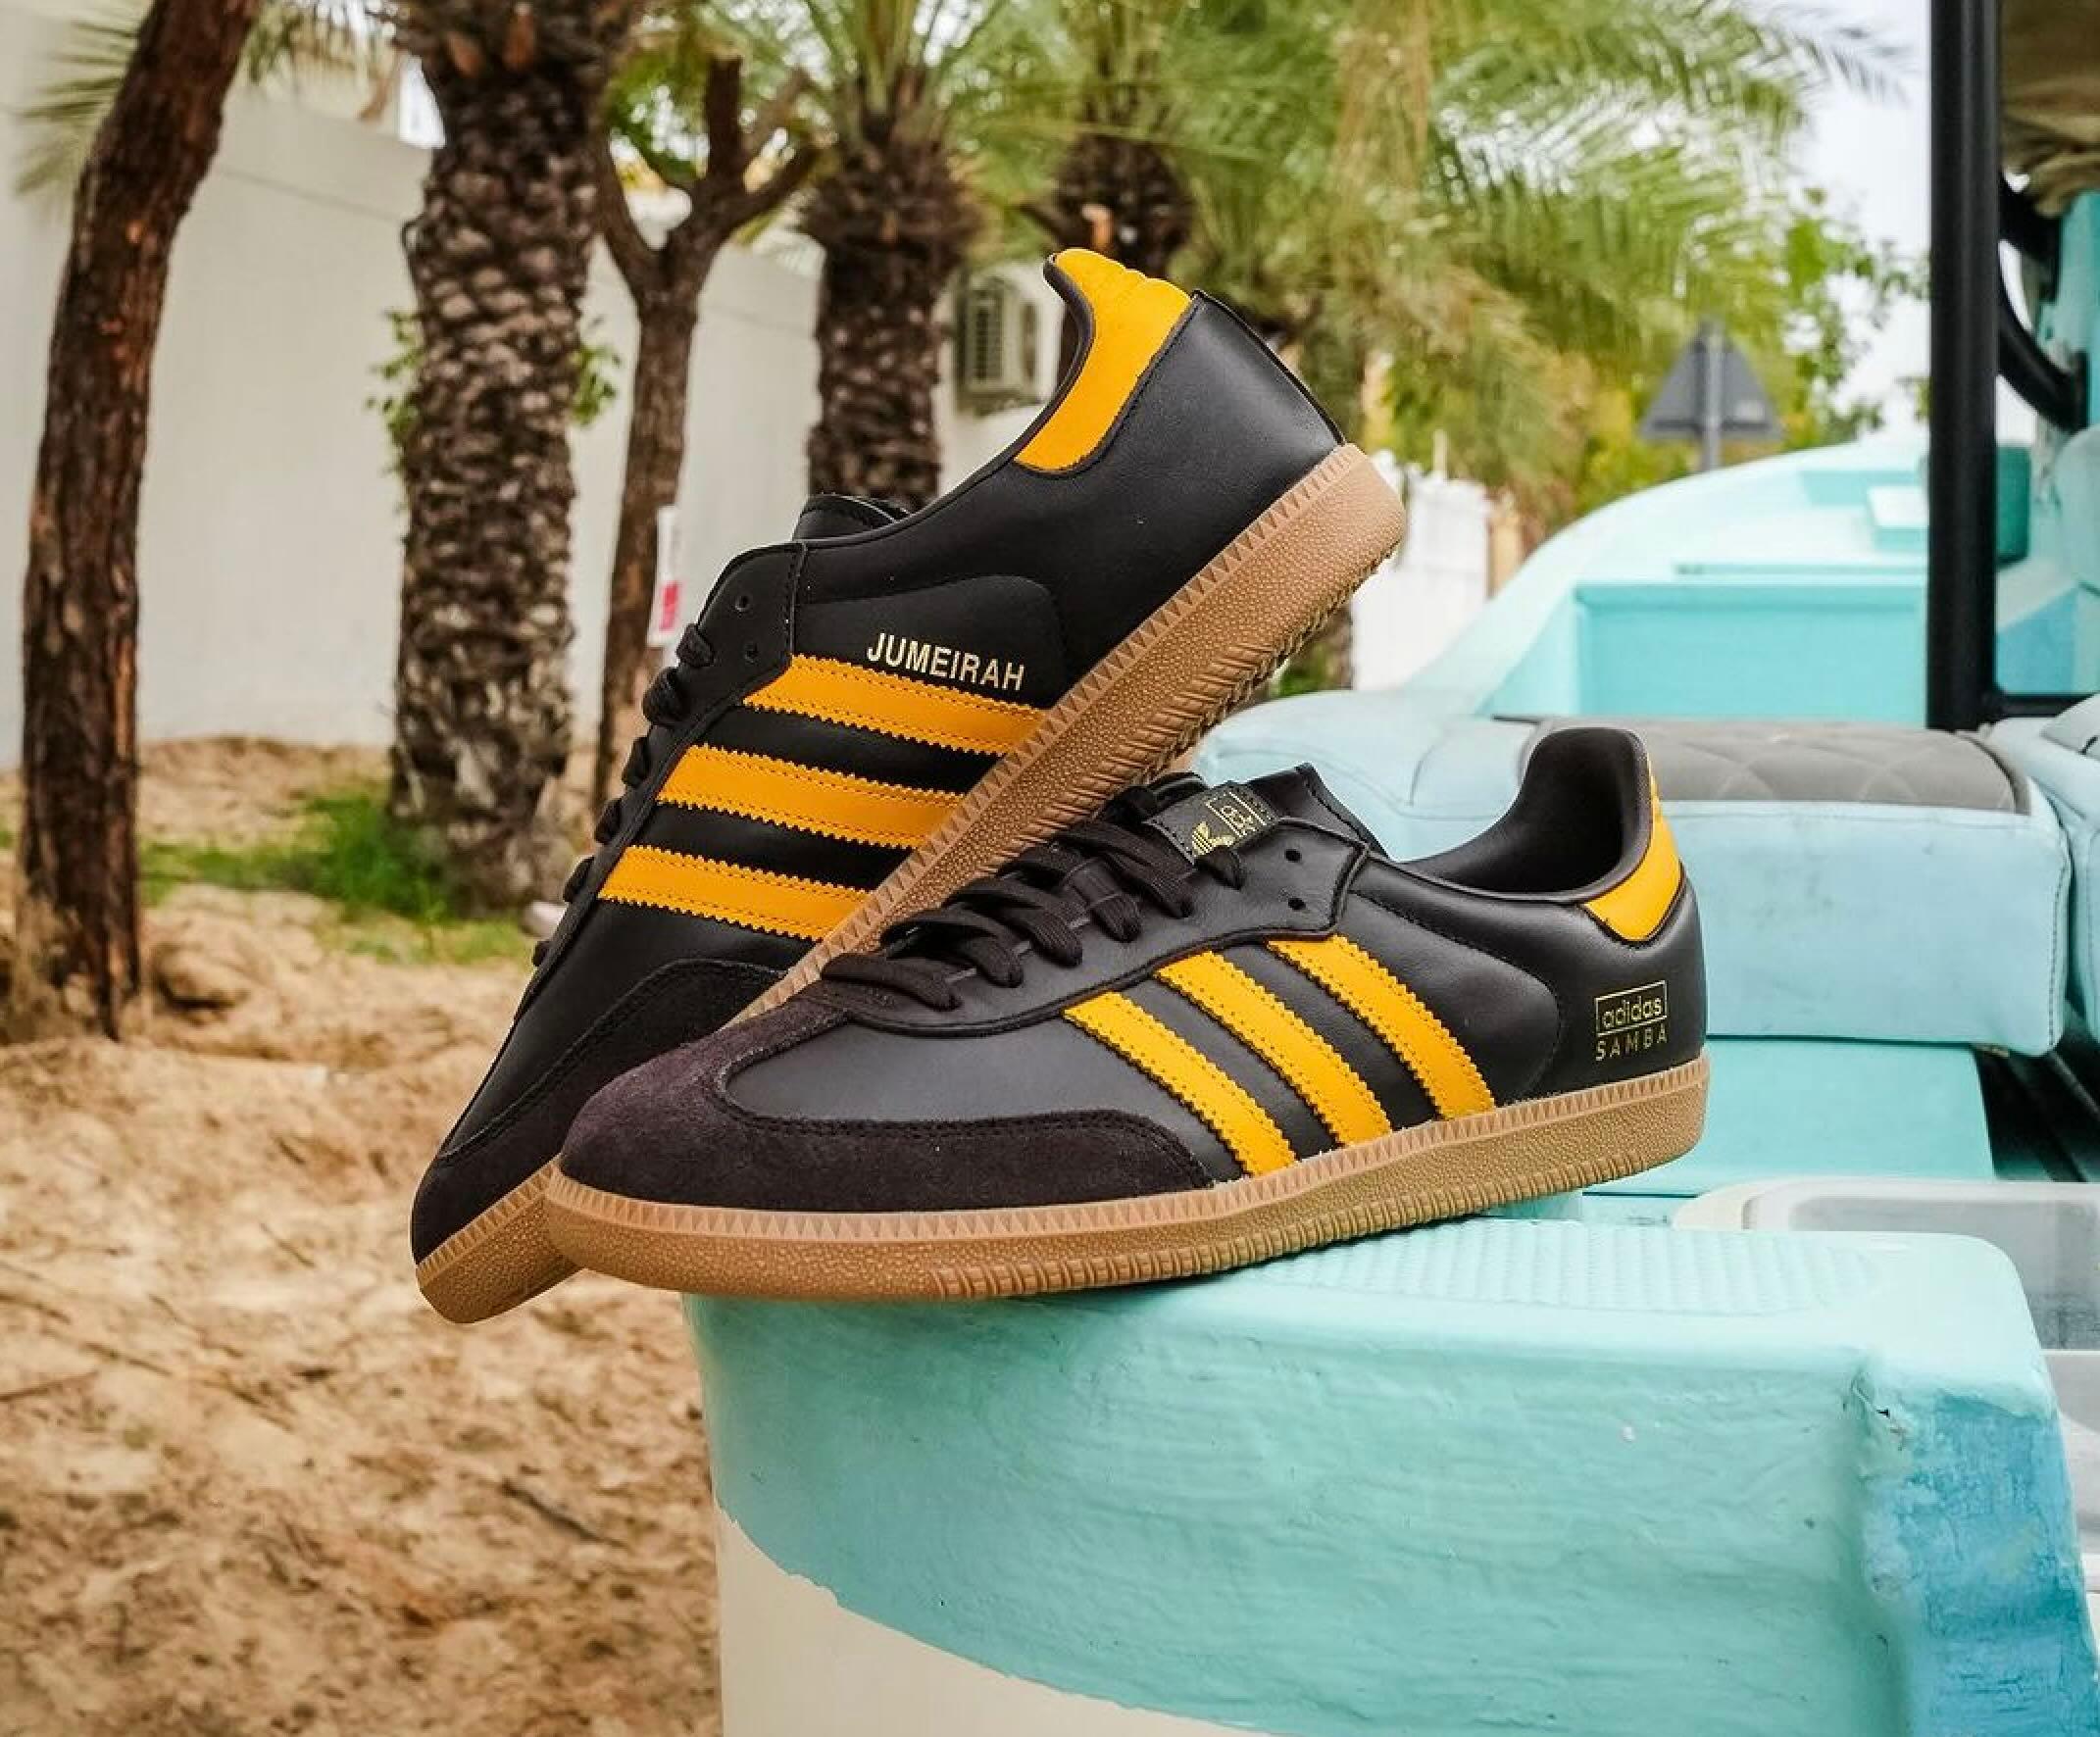 adidas creates a pair of Dubai sneakers – and here’s how to buy them -image